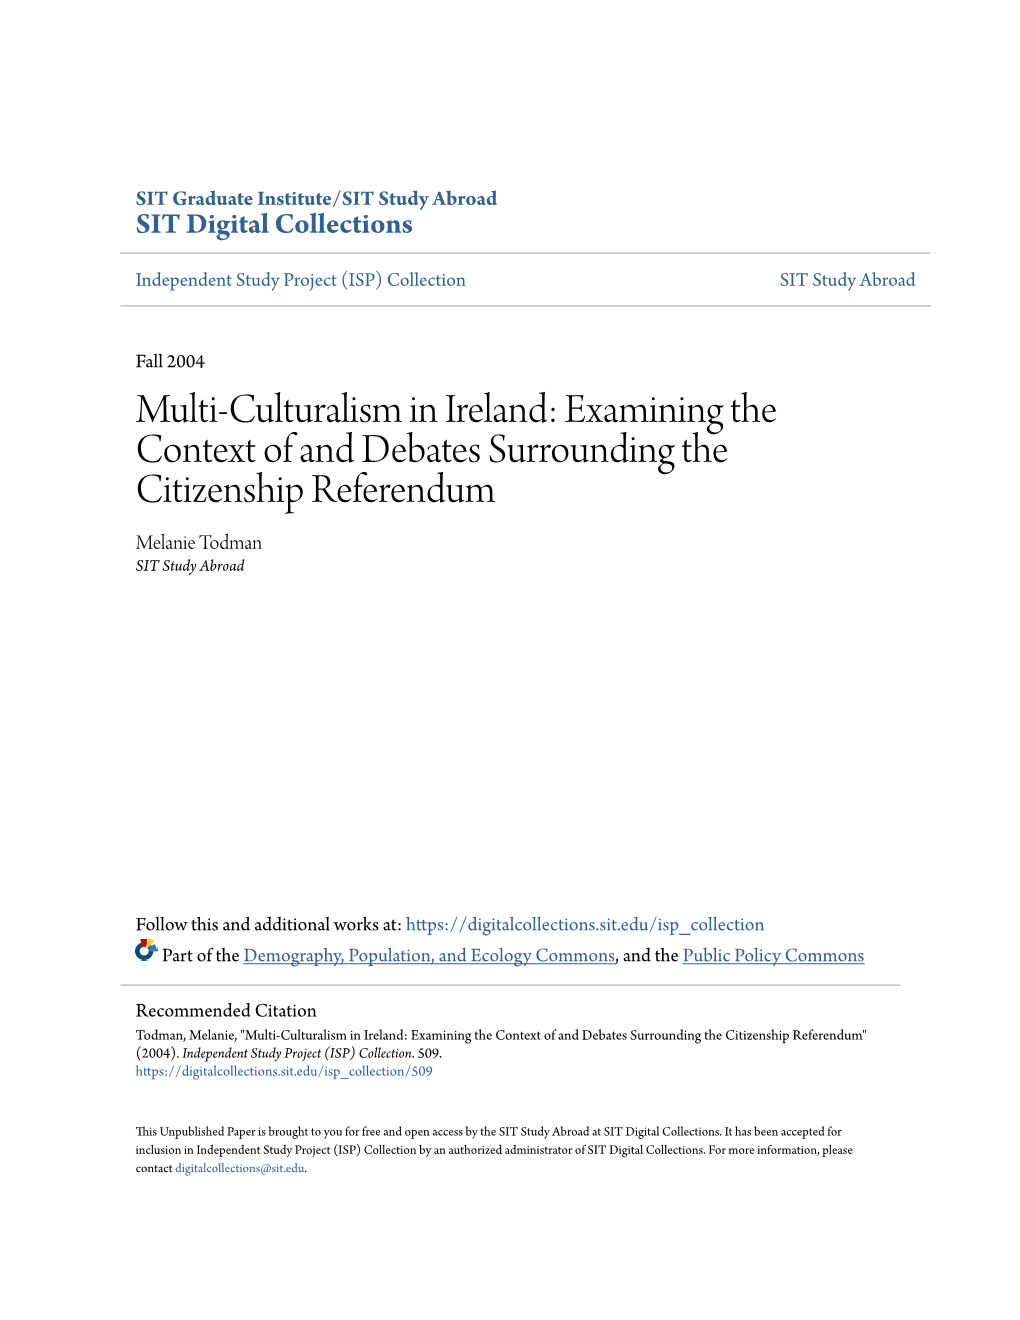 Multi-Culturalism in Ireland: Examining the Context of and Debates Surrounding the Citizenship Referendum Melanie Todman SIT Study Abroad